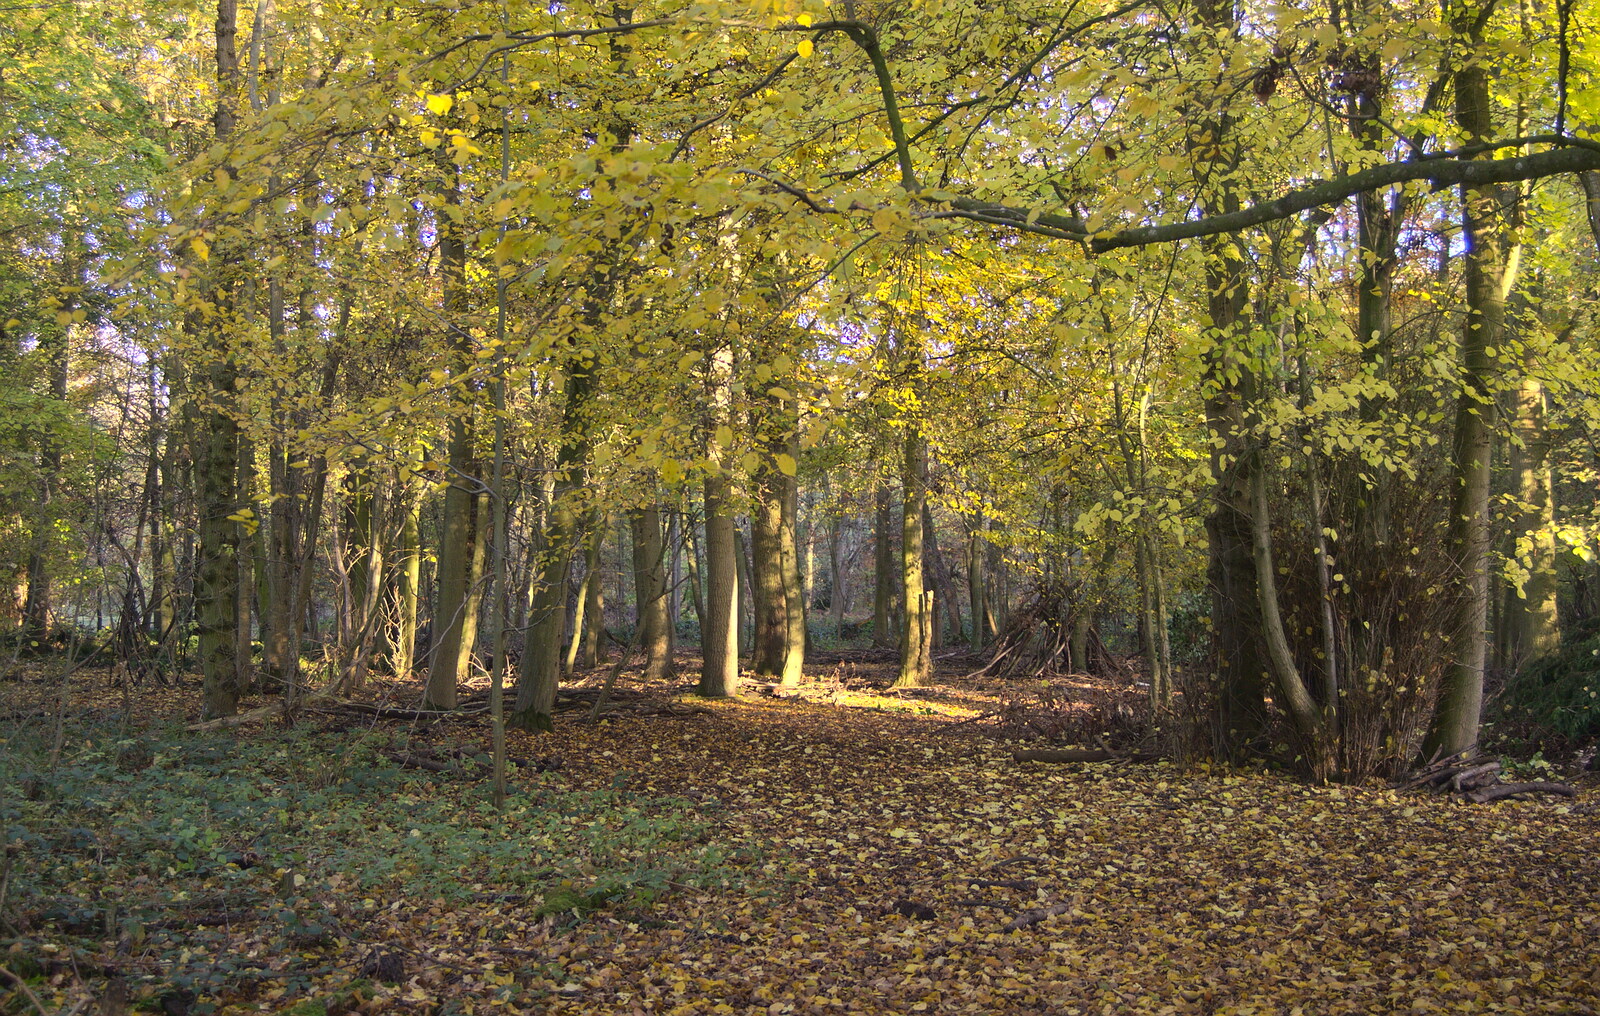 Woodland scene from A Busy Day, Southwold and Thornham, Suffolk - 11th November 2012